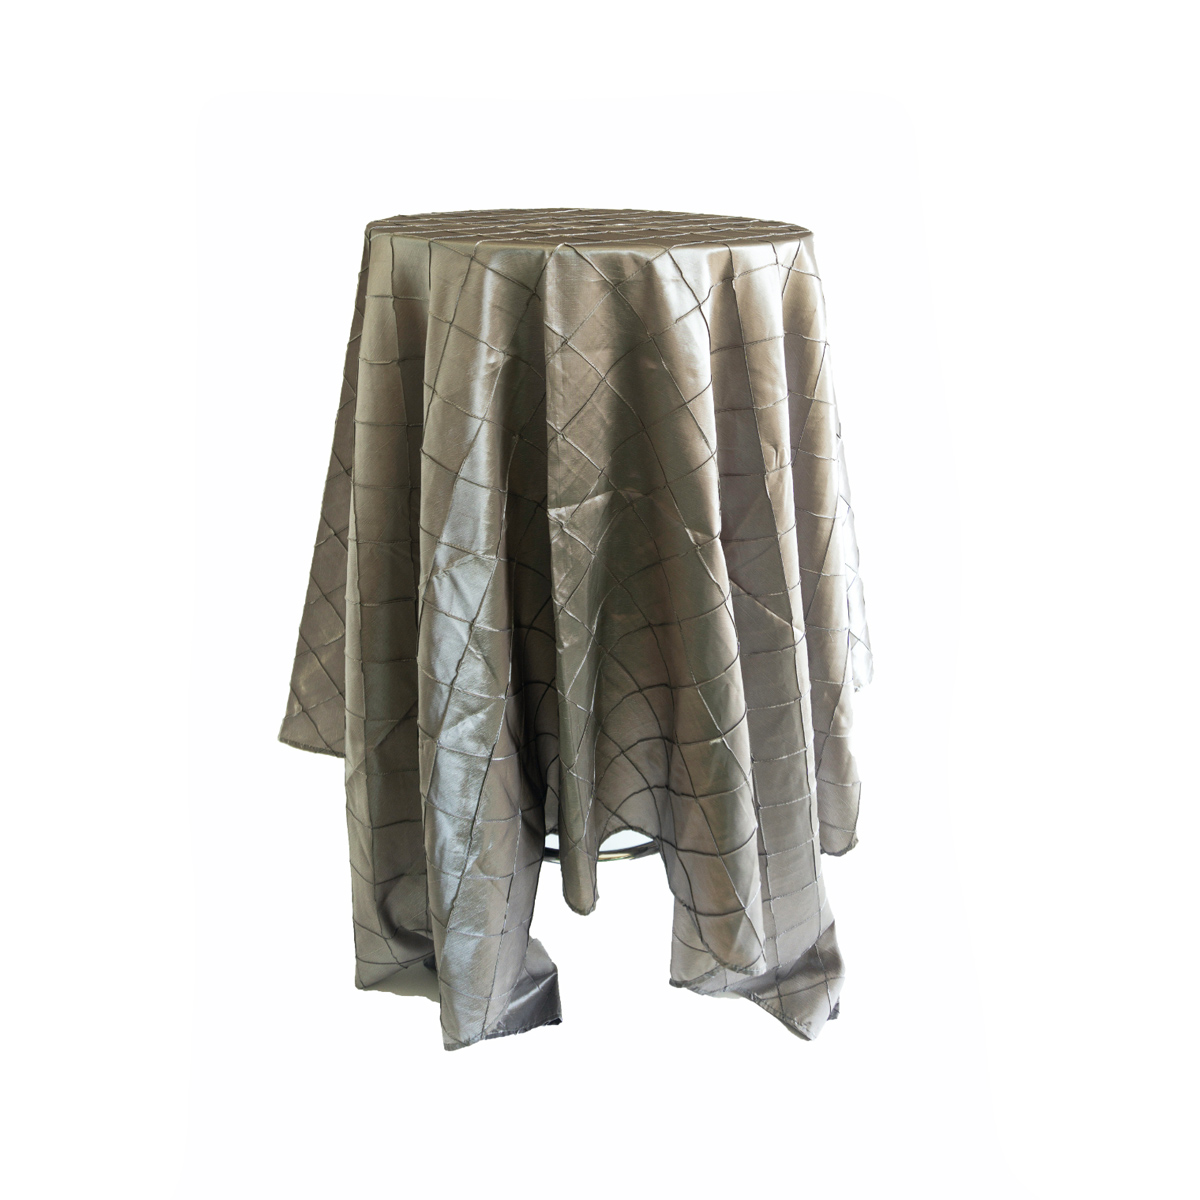  Silver Pintuck Square Overlay Tablecloth 